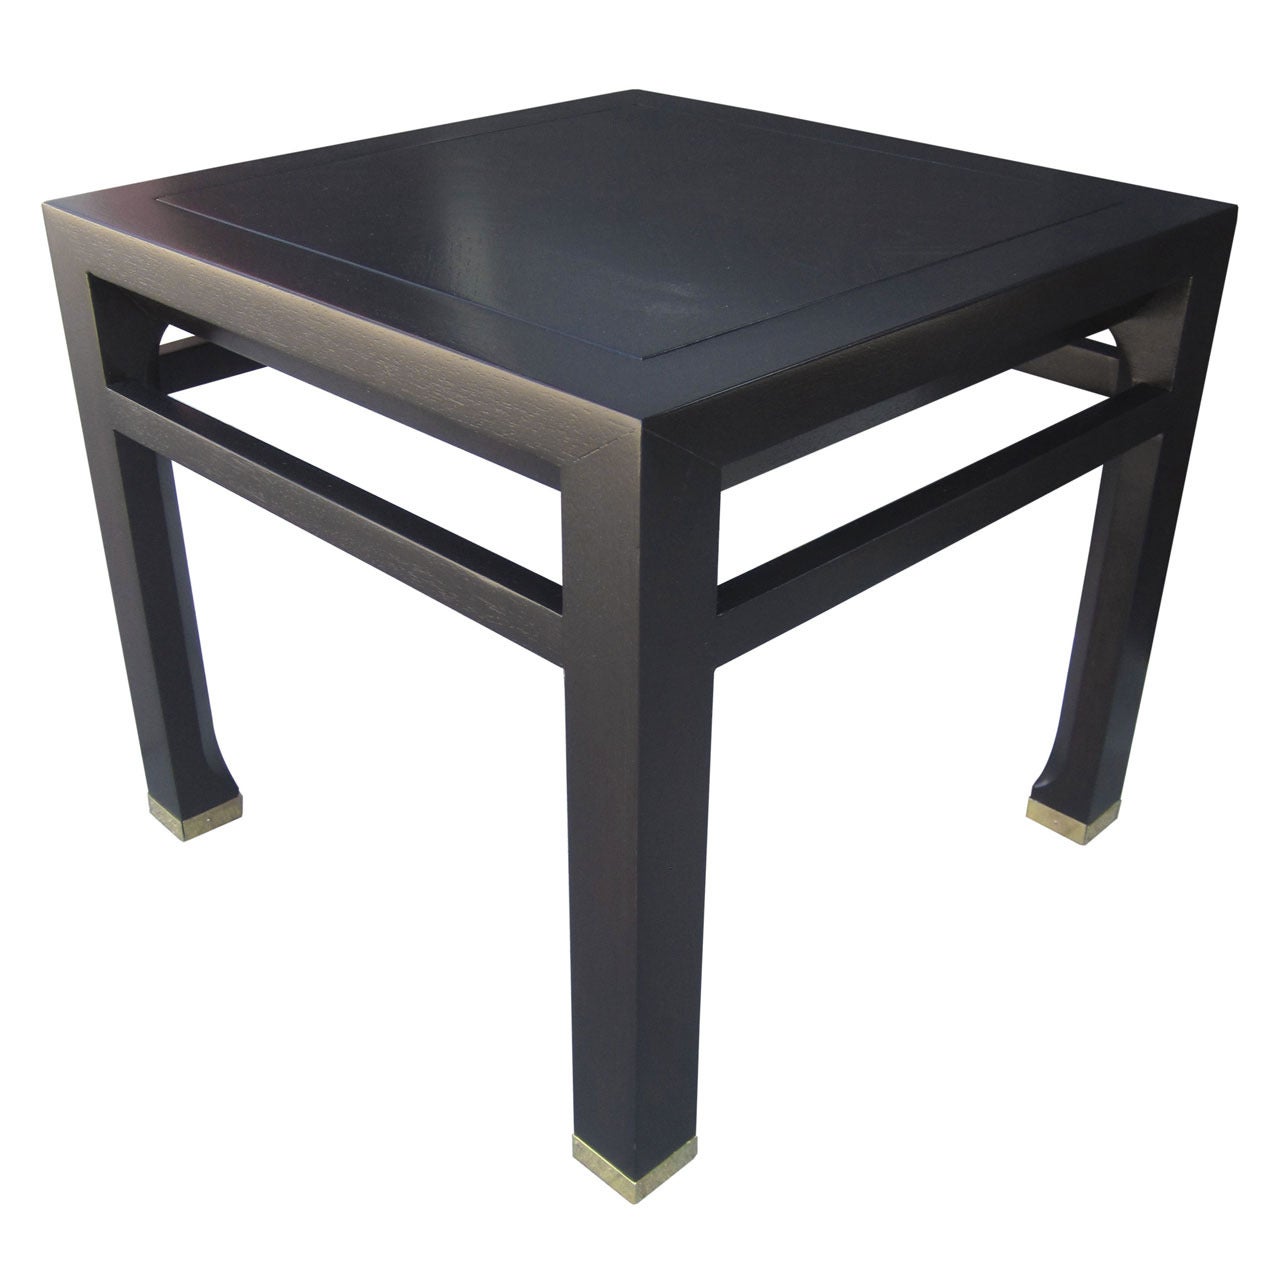 Pair of stunning side or end tables with ebonized finish and brass sabots by Michael Taylor for Baker Furniture. Unusual styling with channelled detailing around the perimeter of the top and tapered legs that widen at the brass capped foot. The